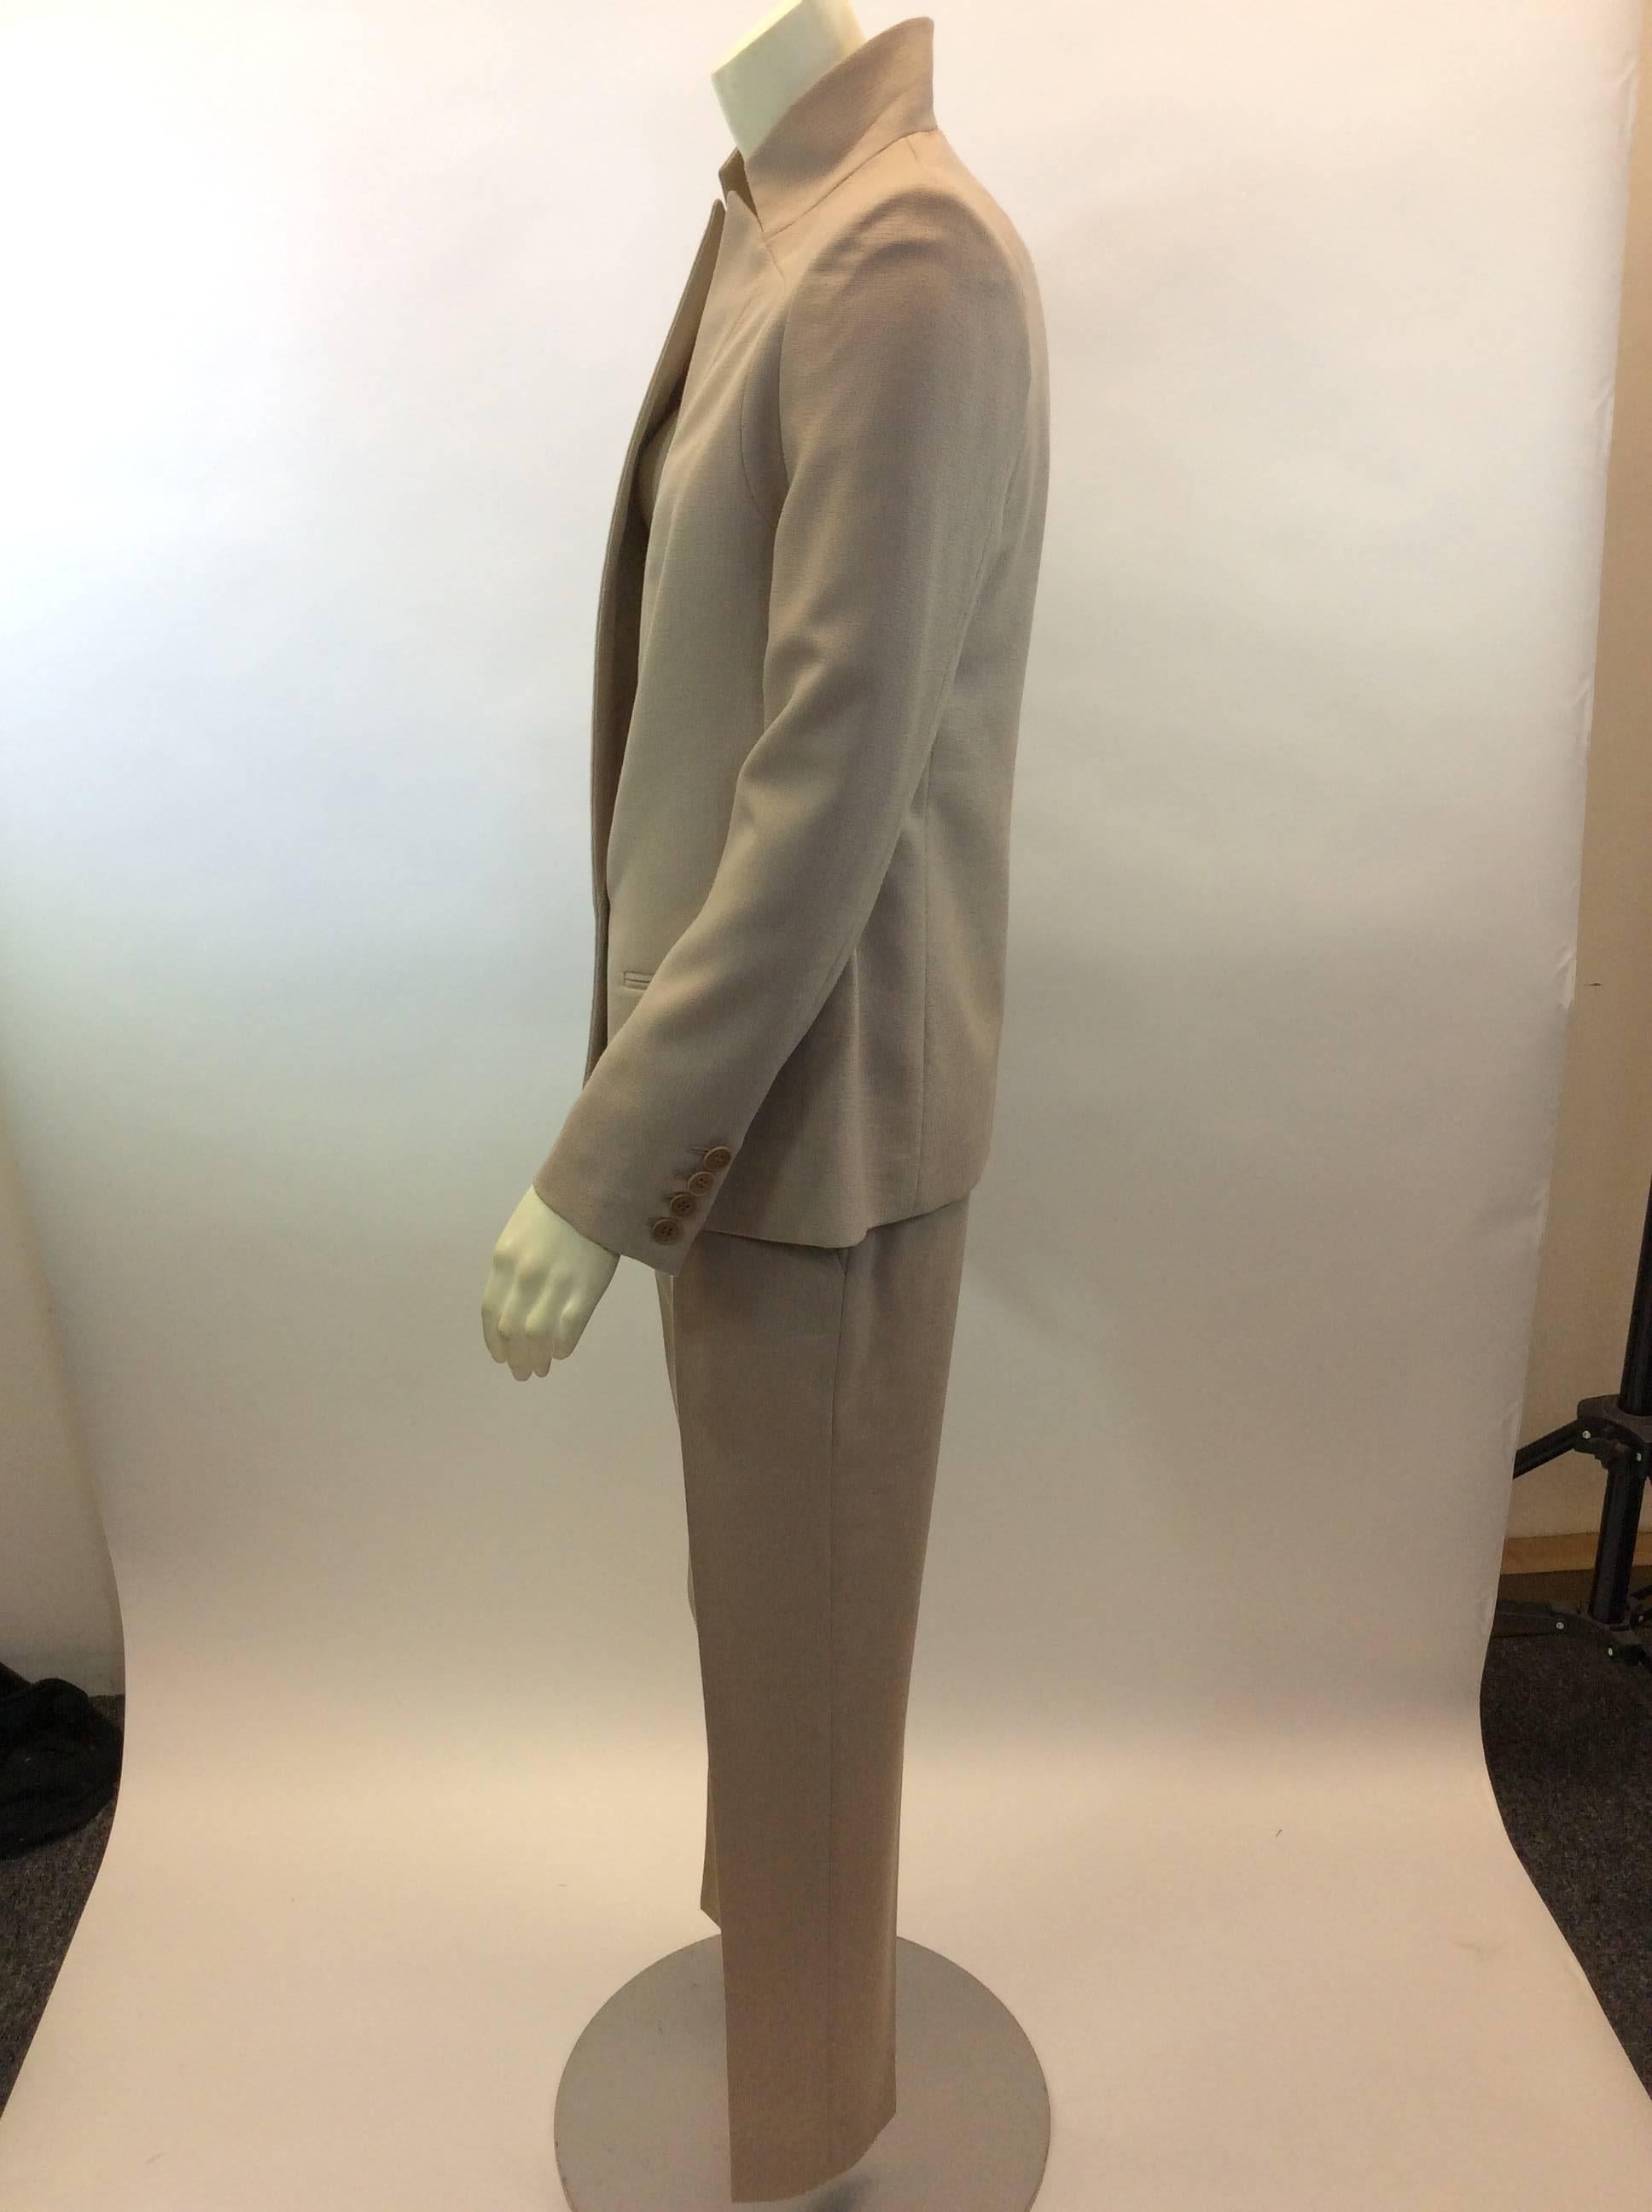 Stella McCartney Tan Pant Suit
Made in Hungary 
$599
100% Wool
Size 42
Jacket:
Length 26